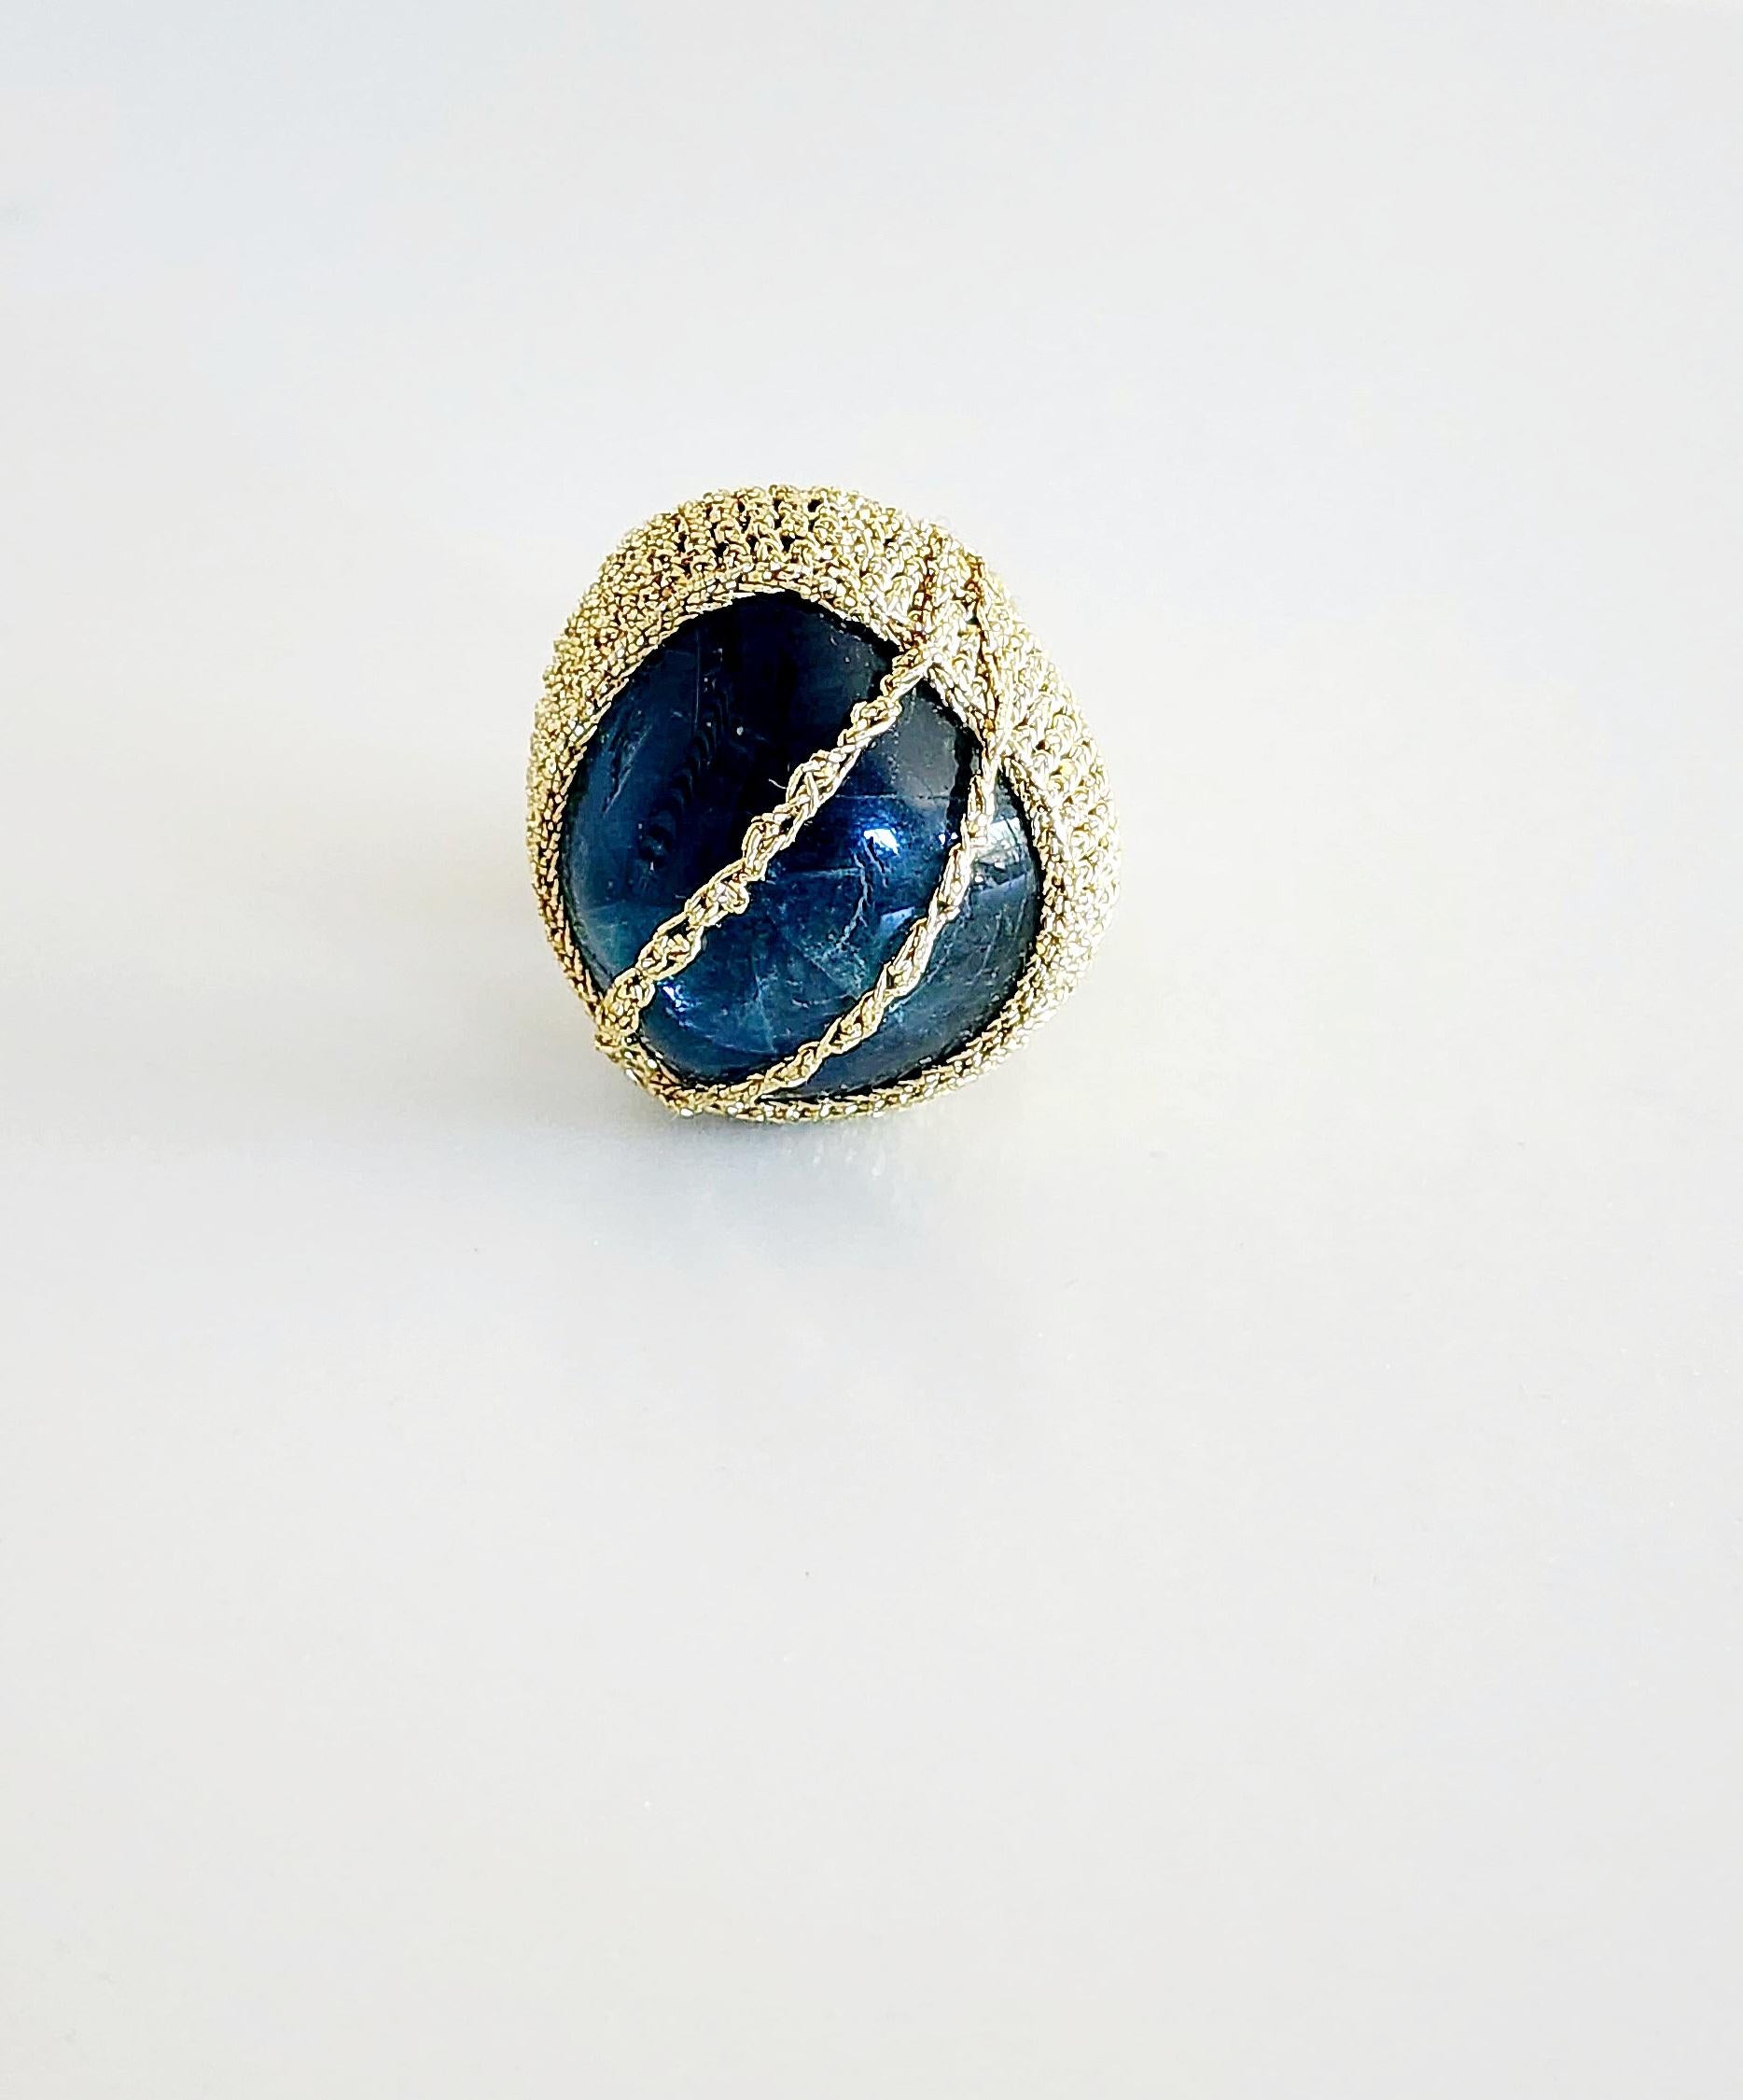 One of a kind crochet ring. The ring is crochet in light golden smooth passing thread. No metal content. The stone is a deep blue natural Fluorite stone.